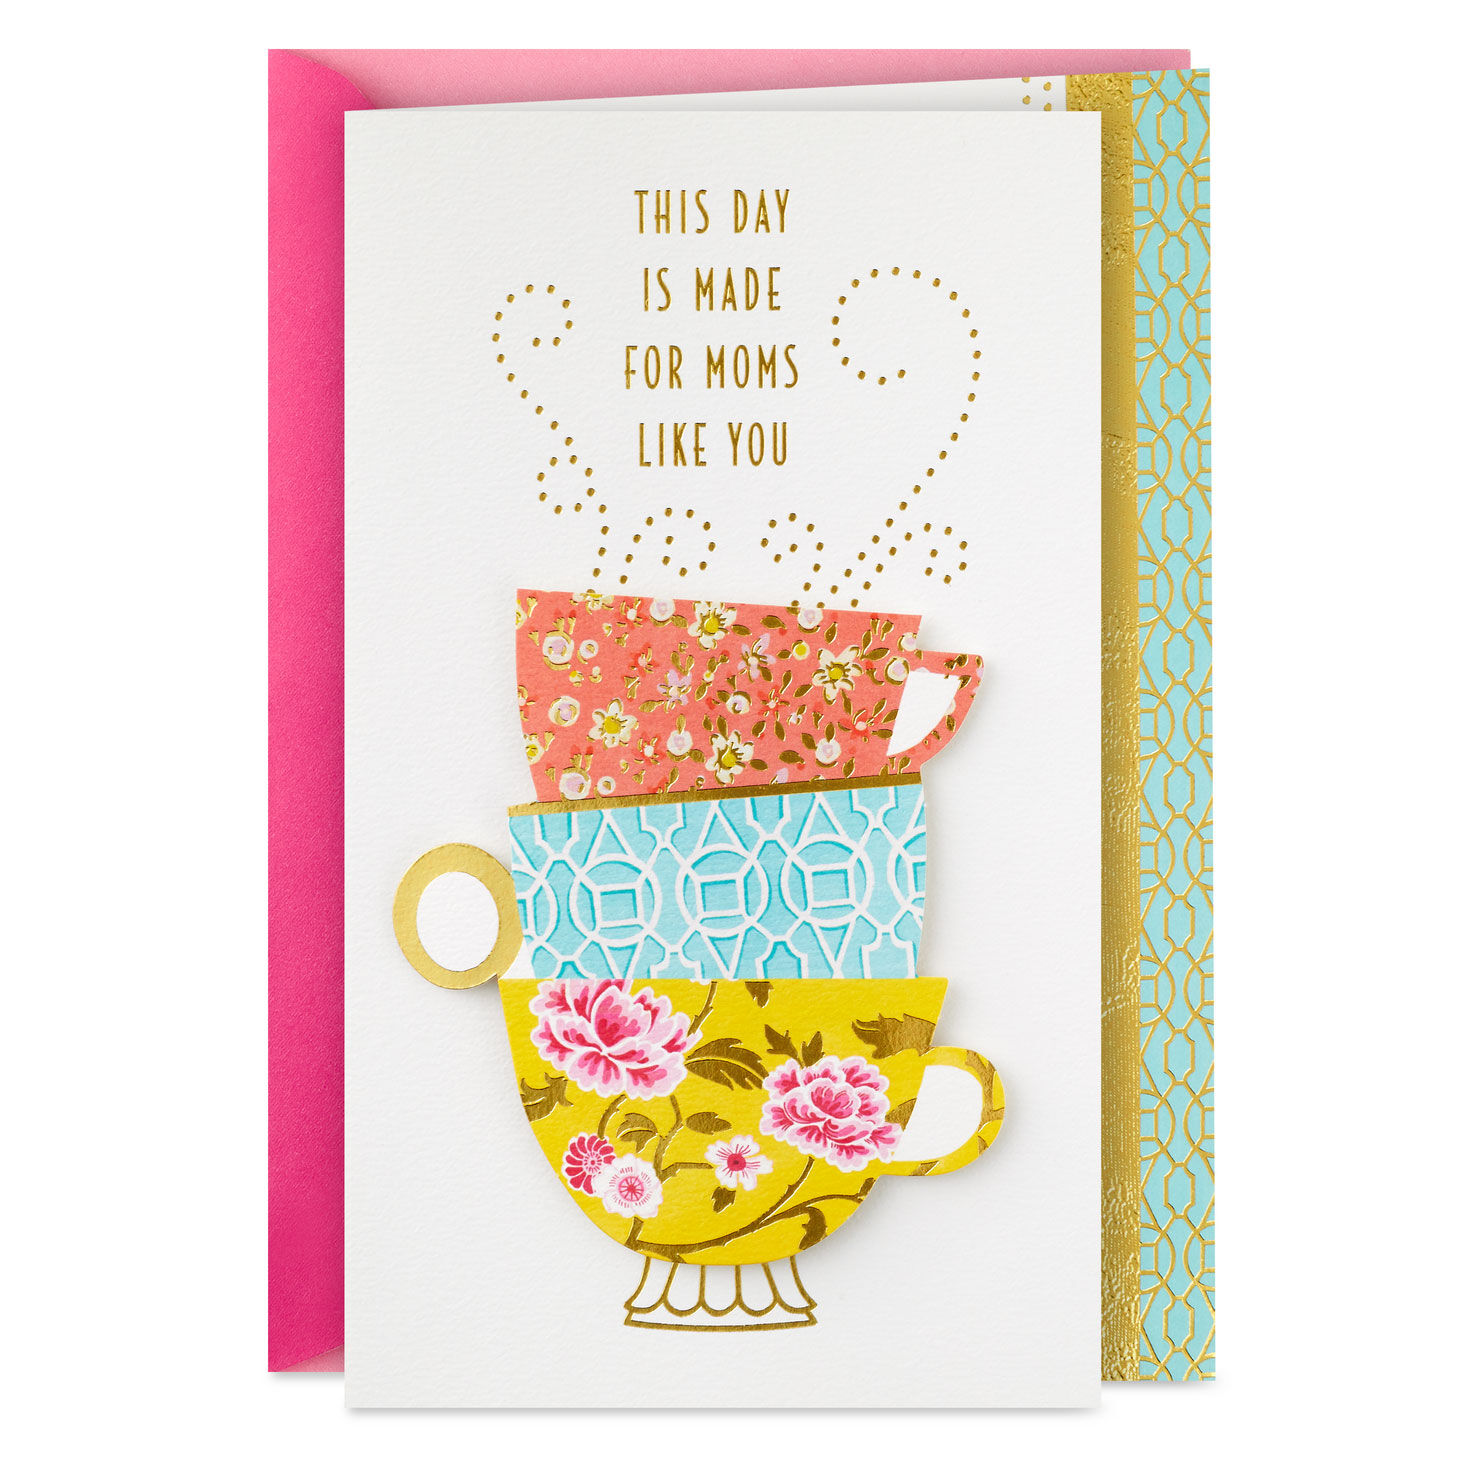 This Day Is Made for Moms Like You Mother's Day Card for only USD 5.99 | Hallmark